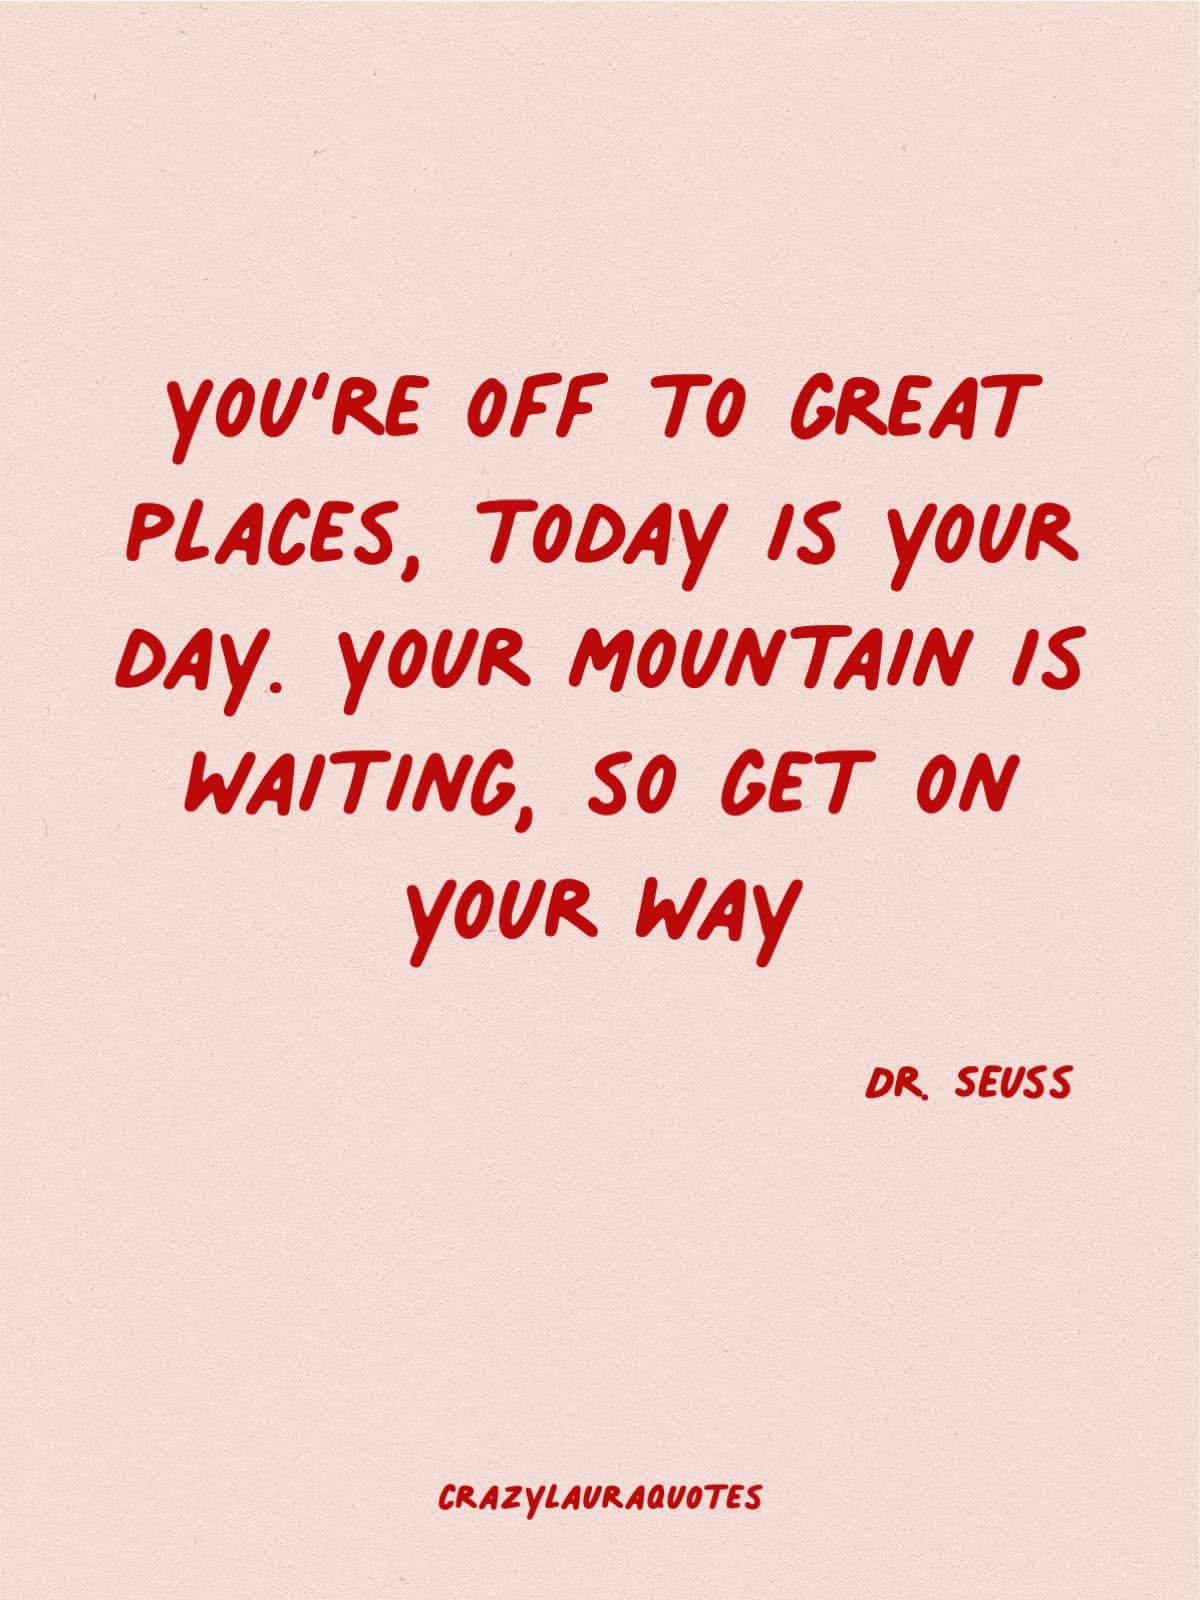 today is your day dr seuss quote